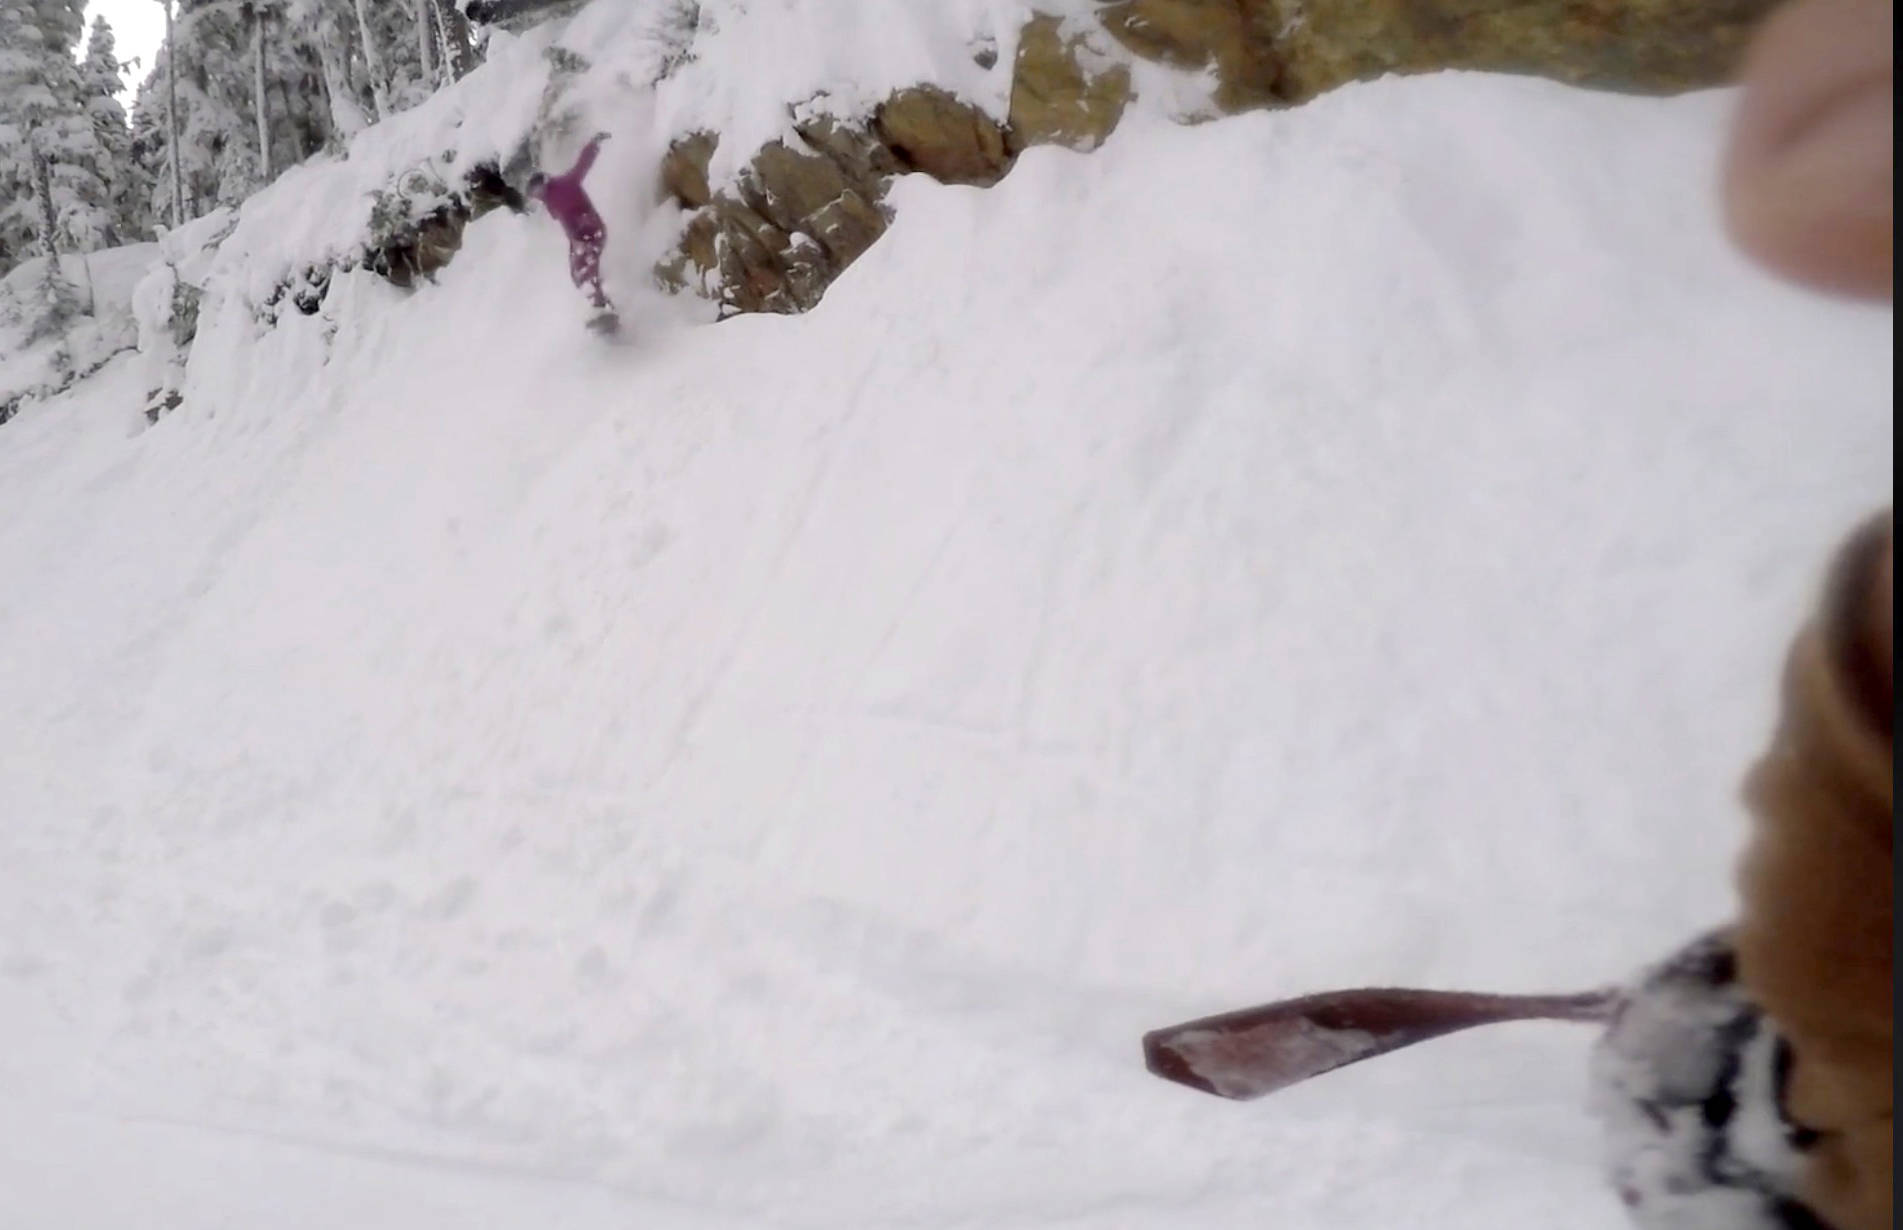 VIDEO: Boarder disappears into Whistler snowbank